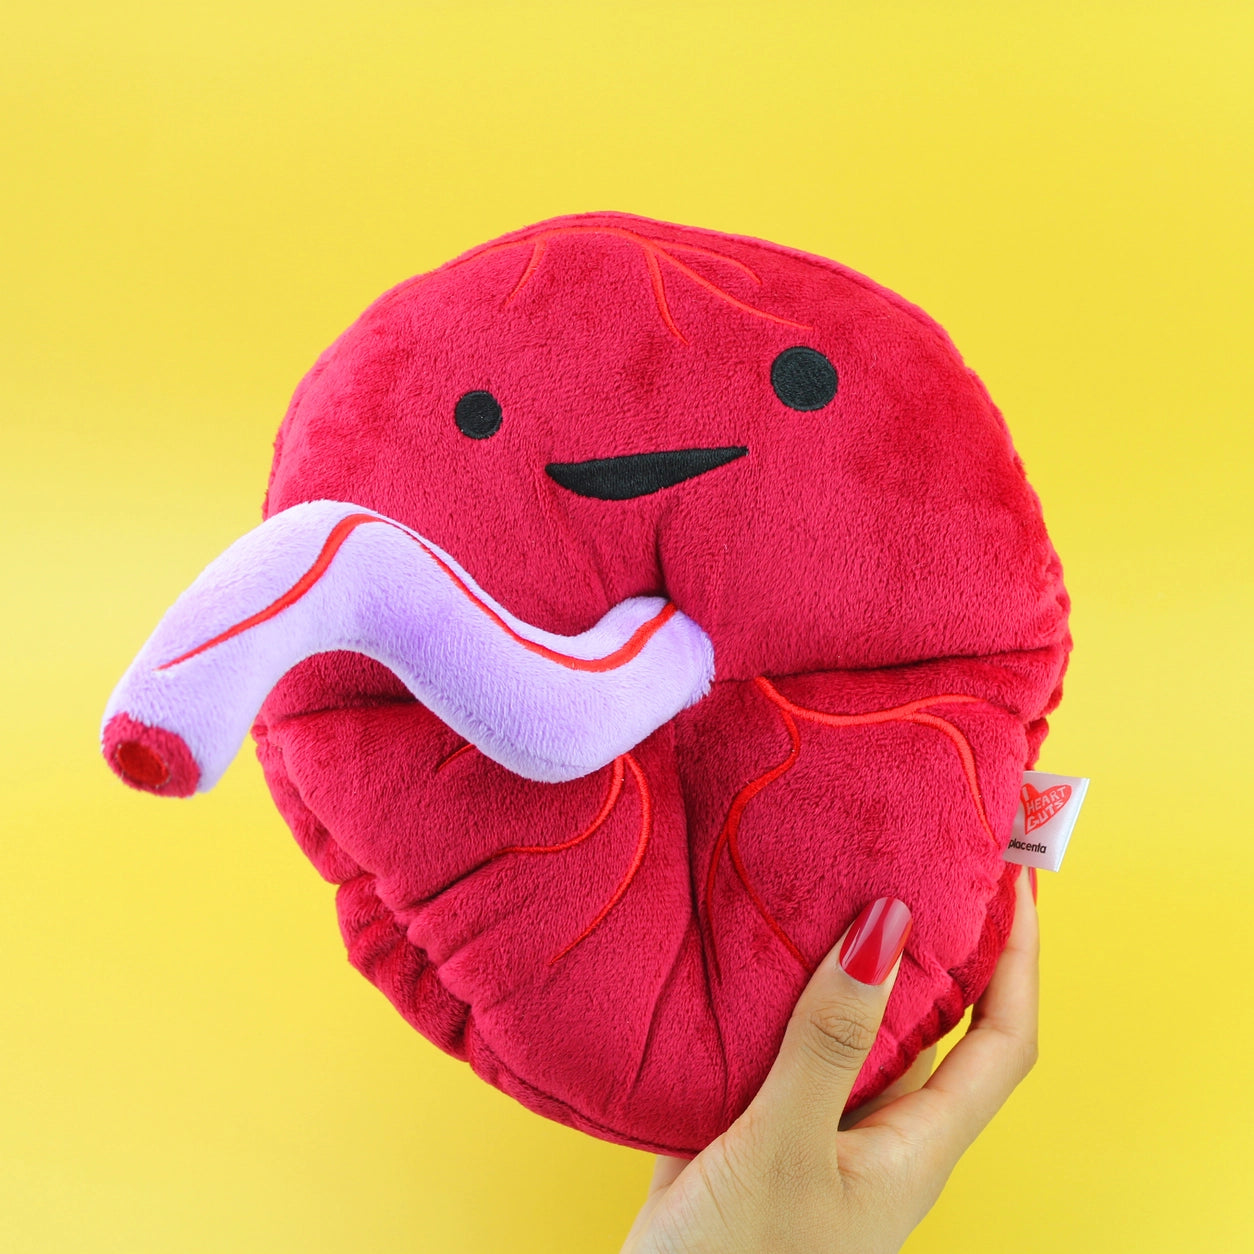 plushie Placenta - Baby's First Roommate